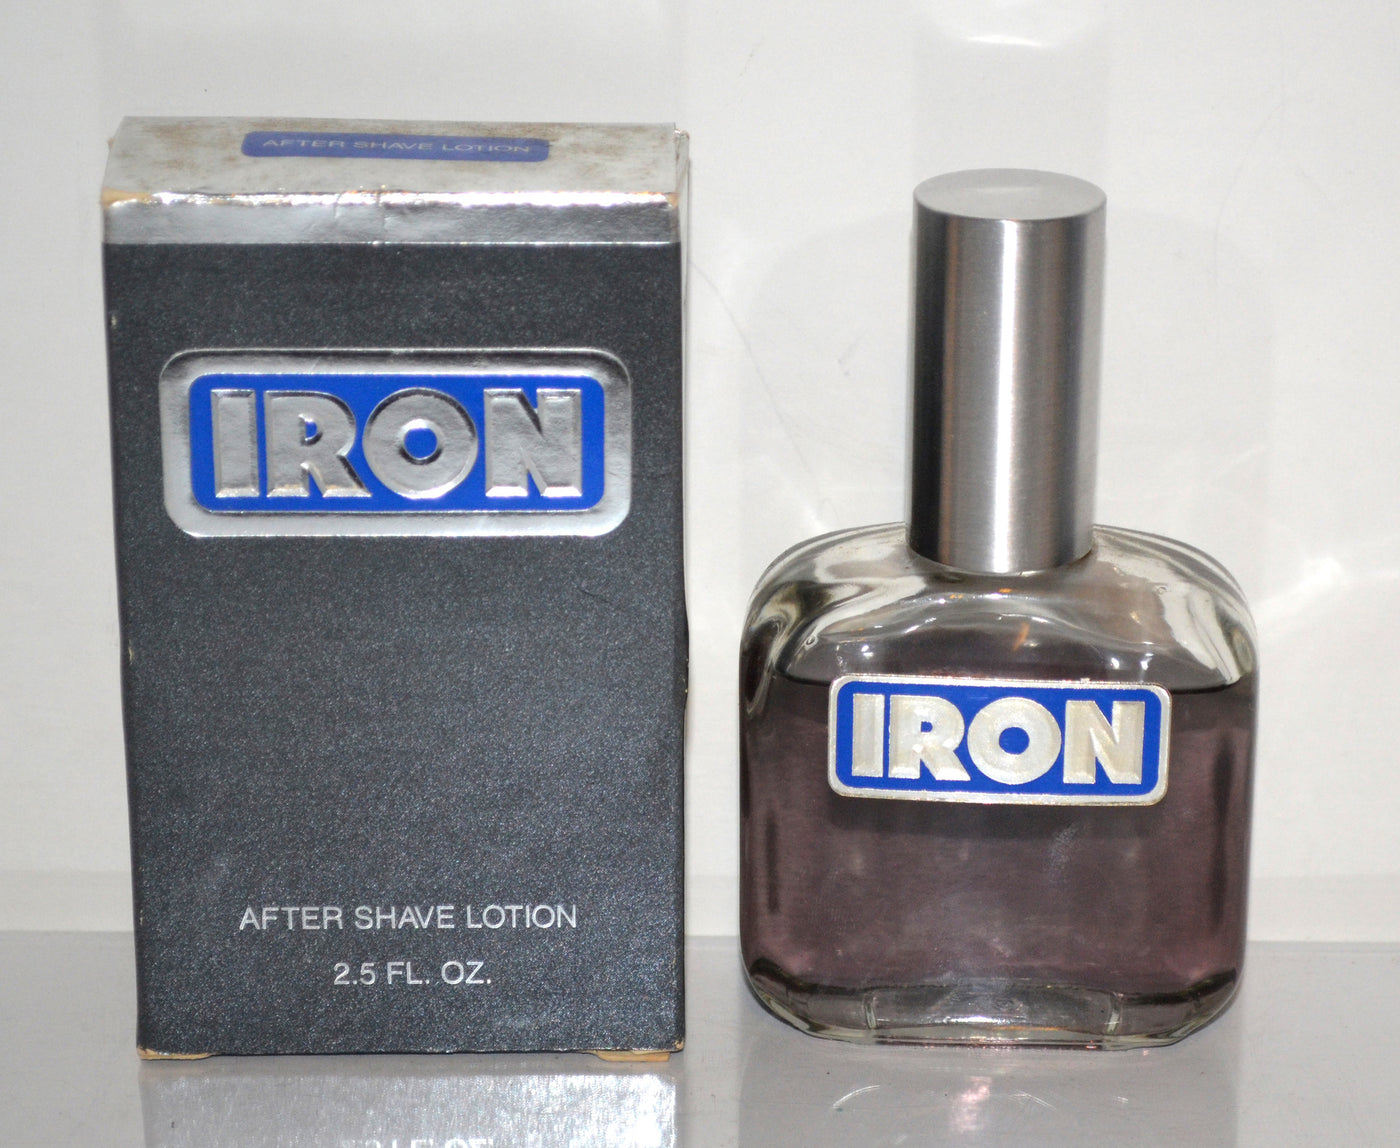 Coty Iron After Shave